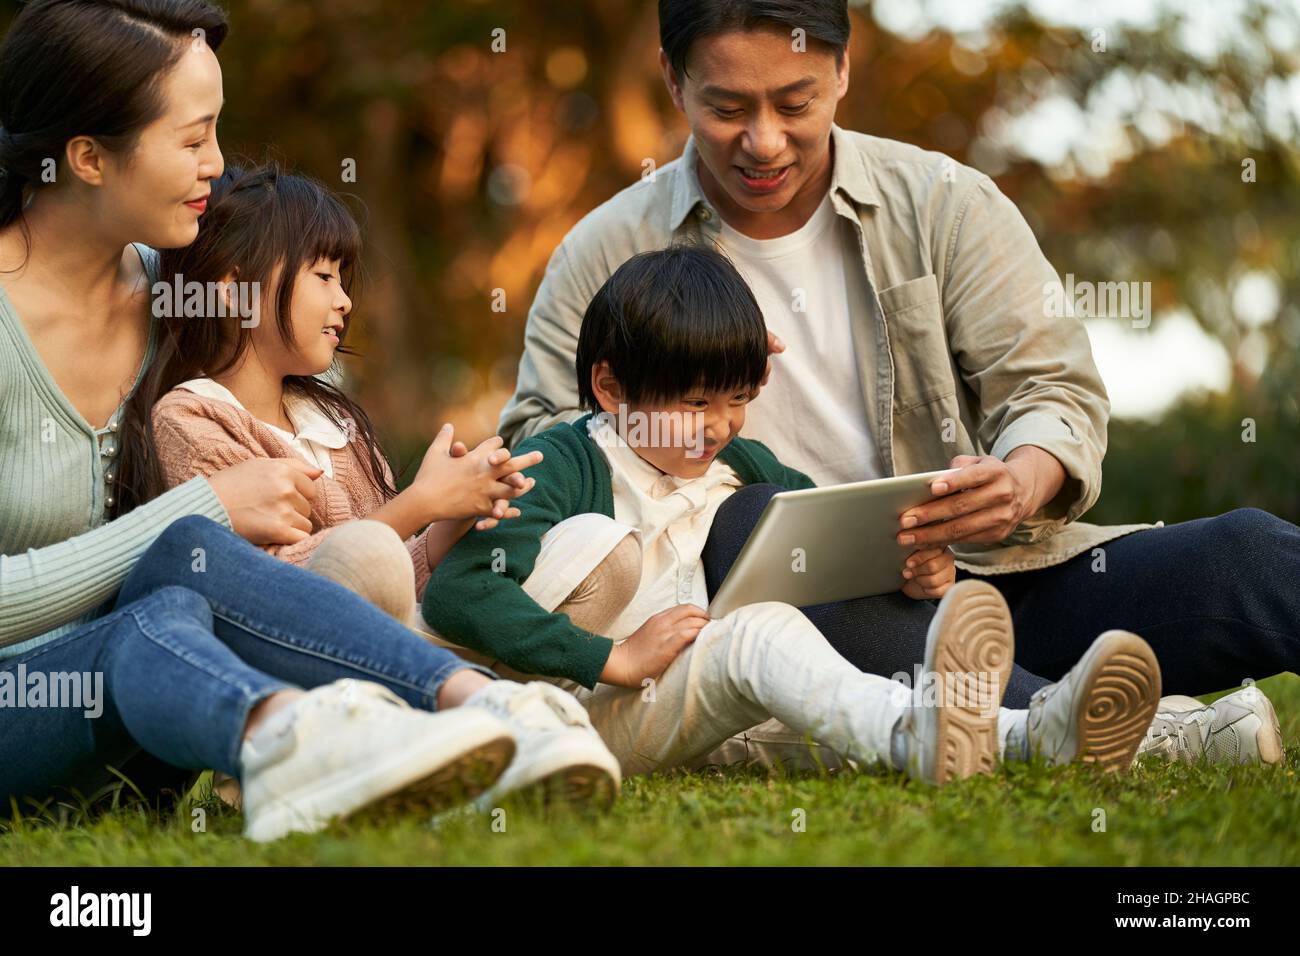 happy asian family with two children having a good time sitting on grass relaxing in city park at sunset Stock Photo